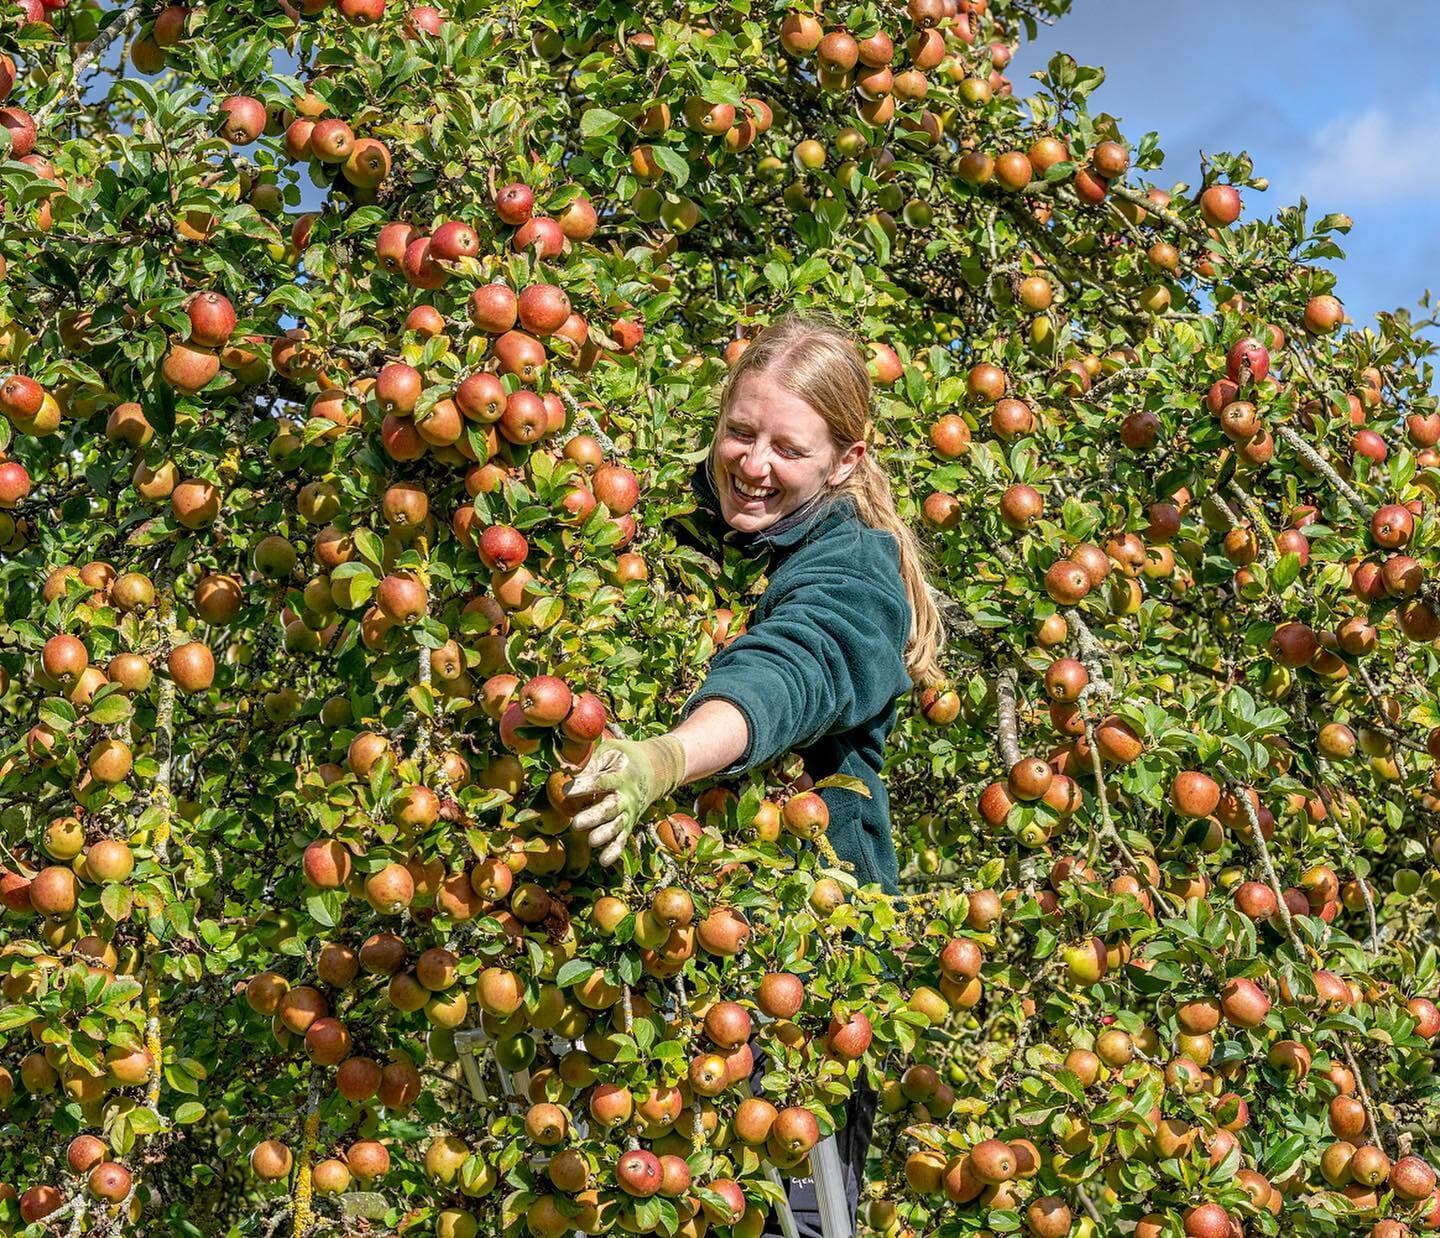 Emma Bird one of the gardeners at Newby Hall harvesting some of the 50 varieties grown in the orchards